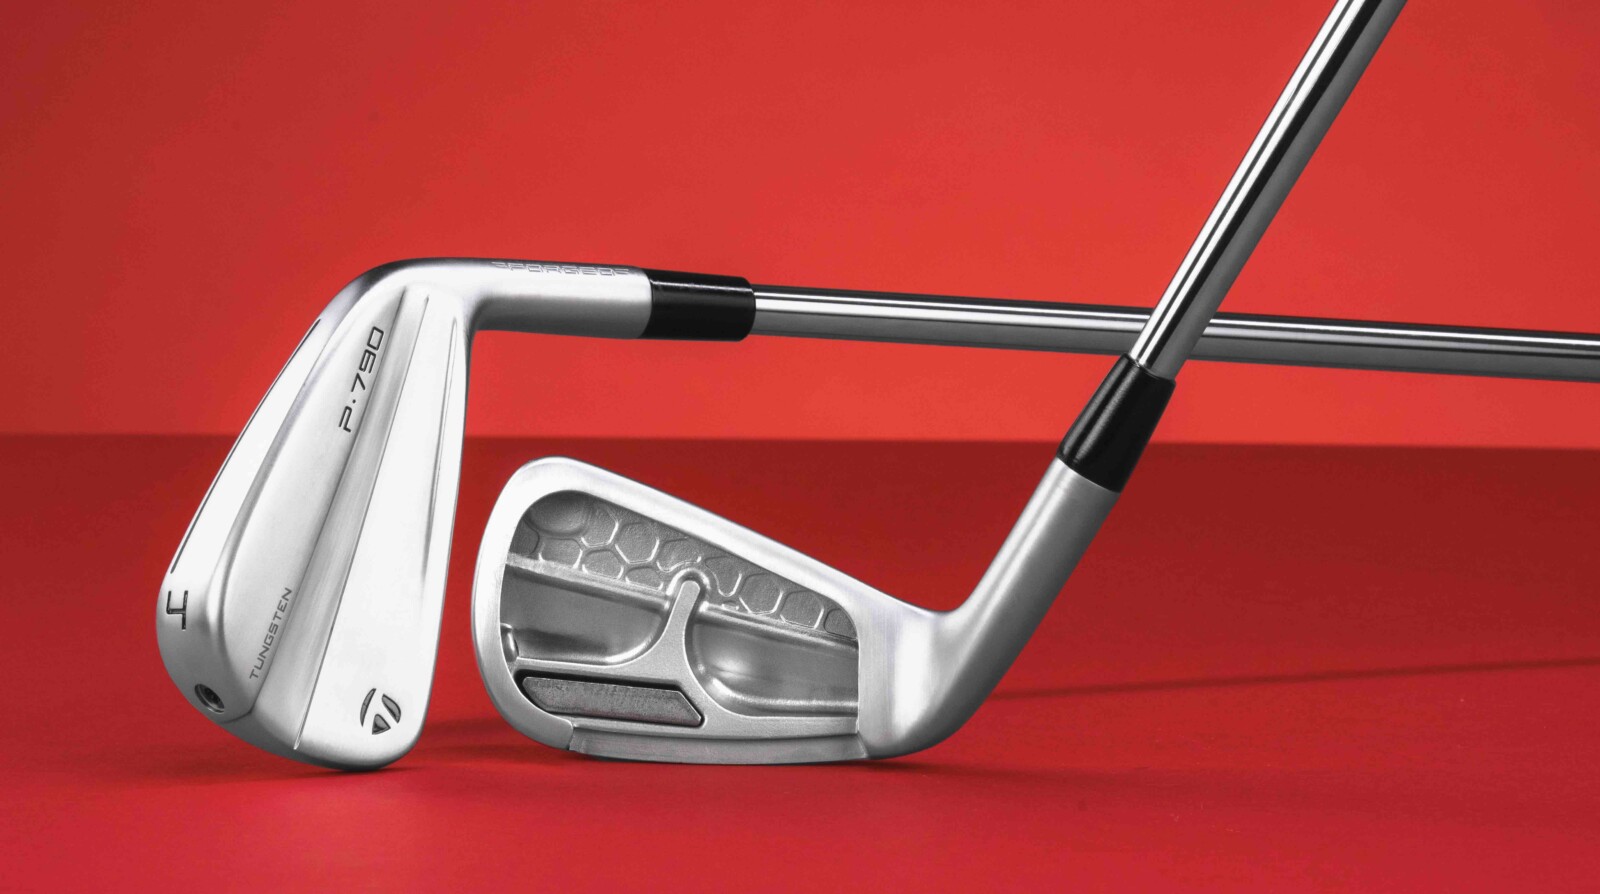 TaylorMade launches P·790 irons – Golf News